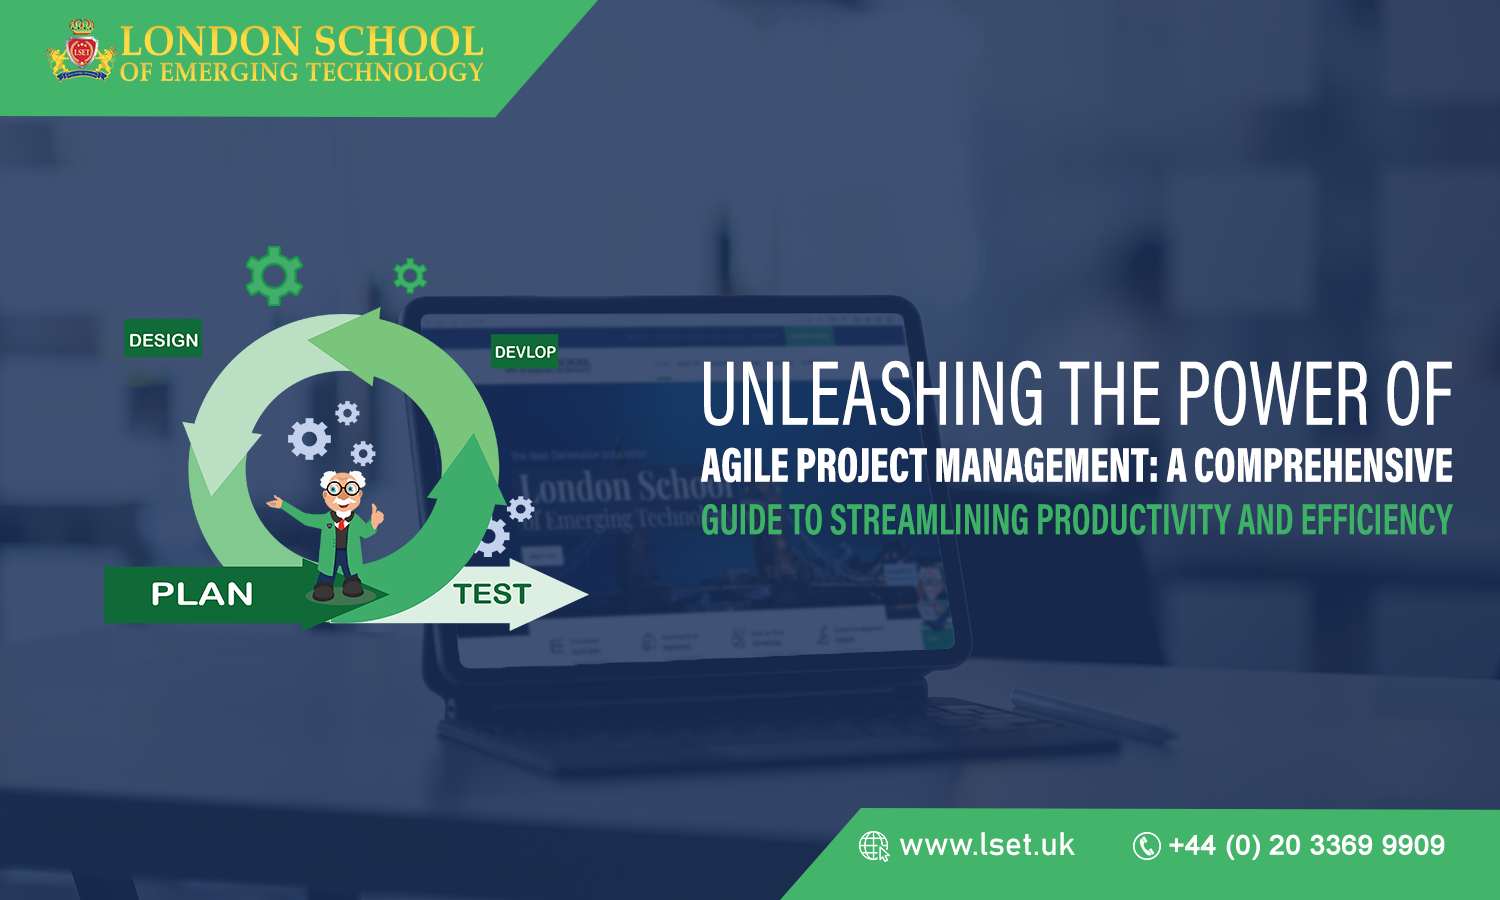 Unleashing the Power of Agile Project Management A Comprehensive Guide to Streamlining Productivity and Efficiency